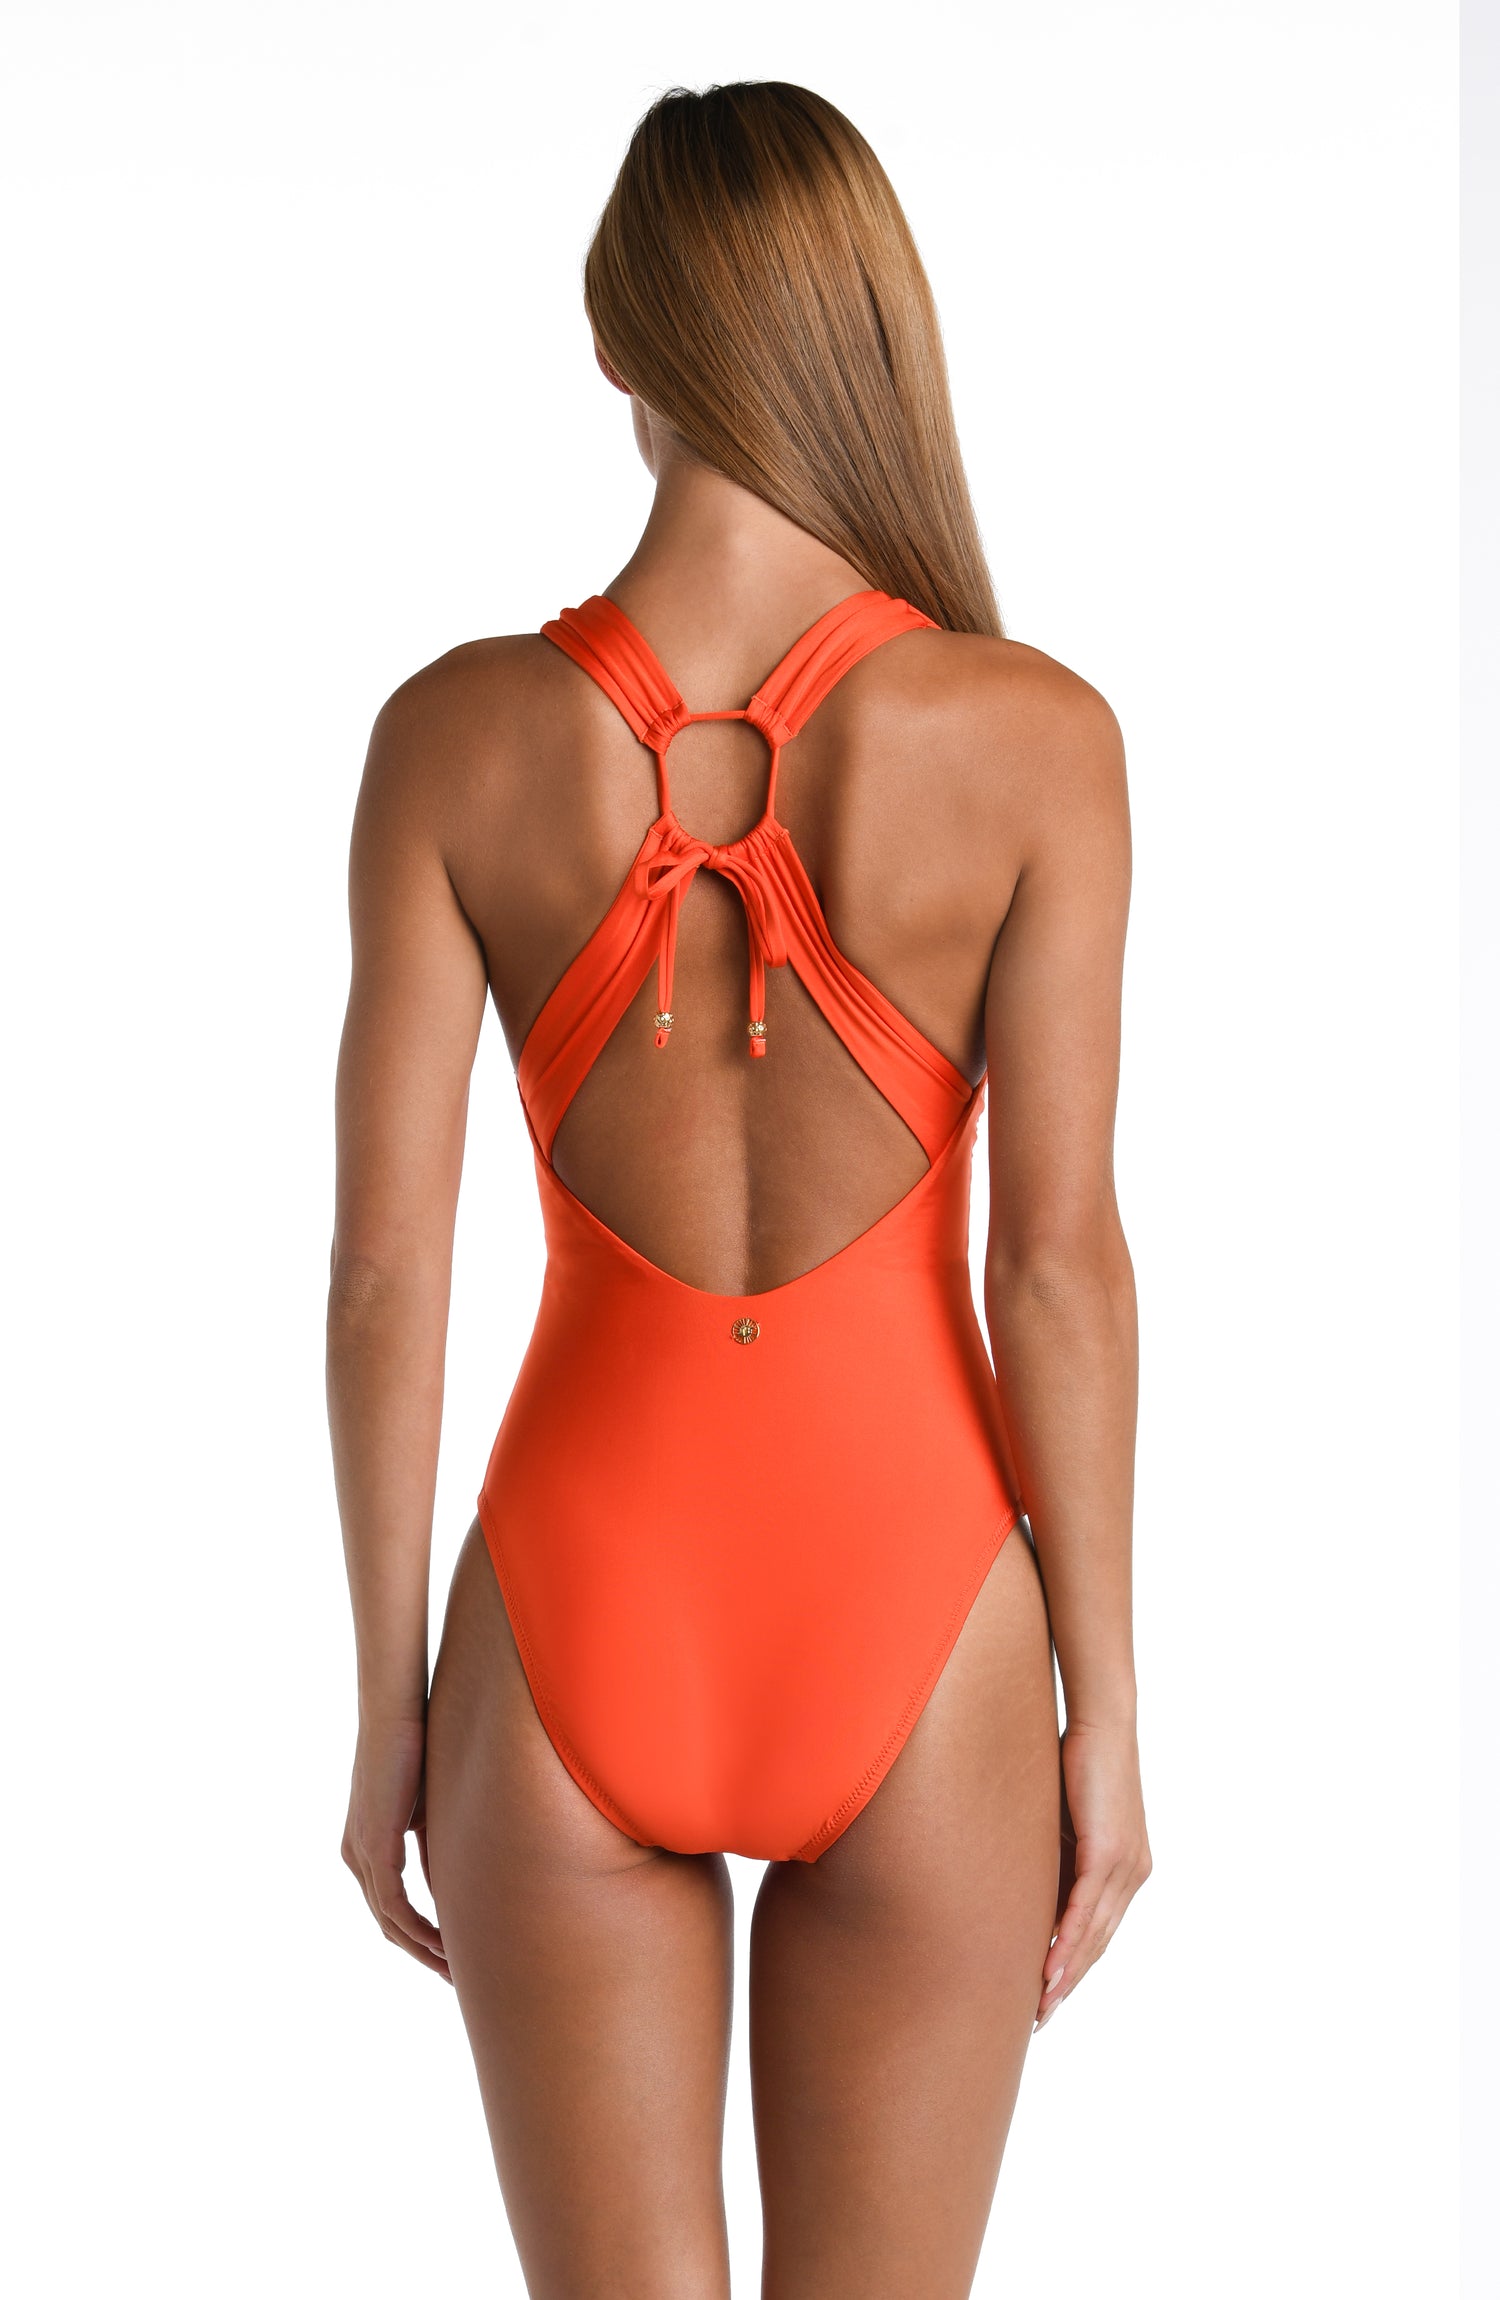 Model is wearing a solid vibrant orange colored Keyhole V-Plunge One Piece